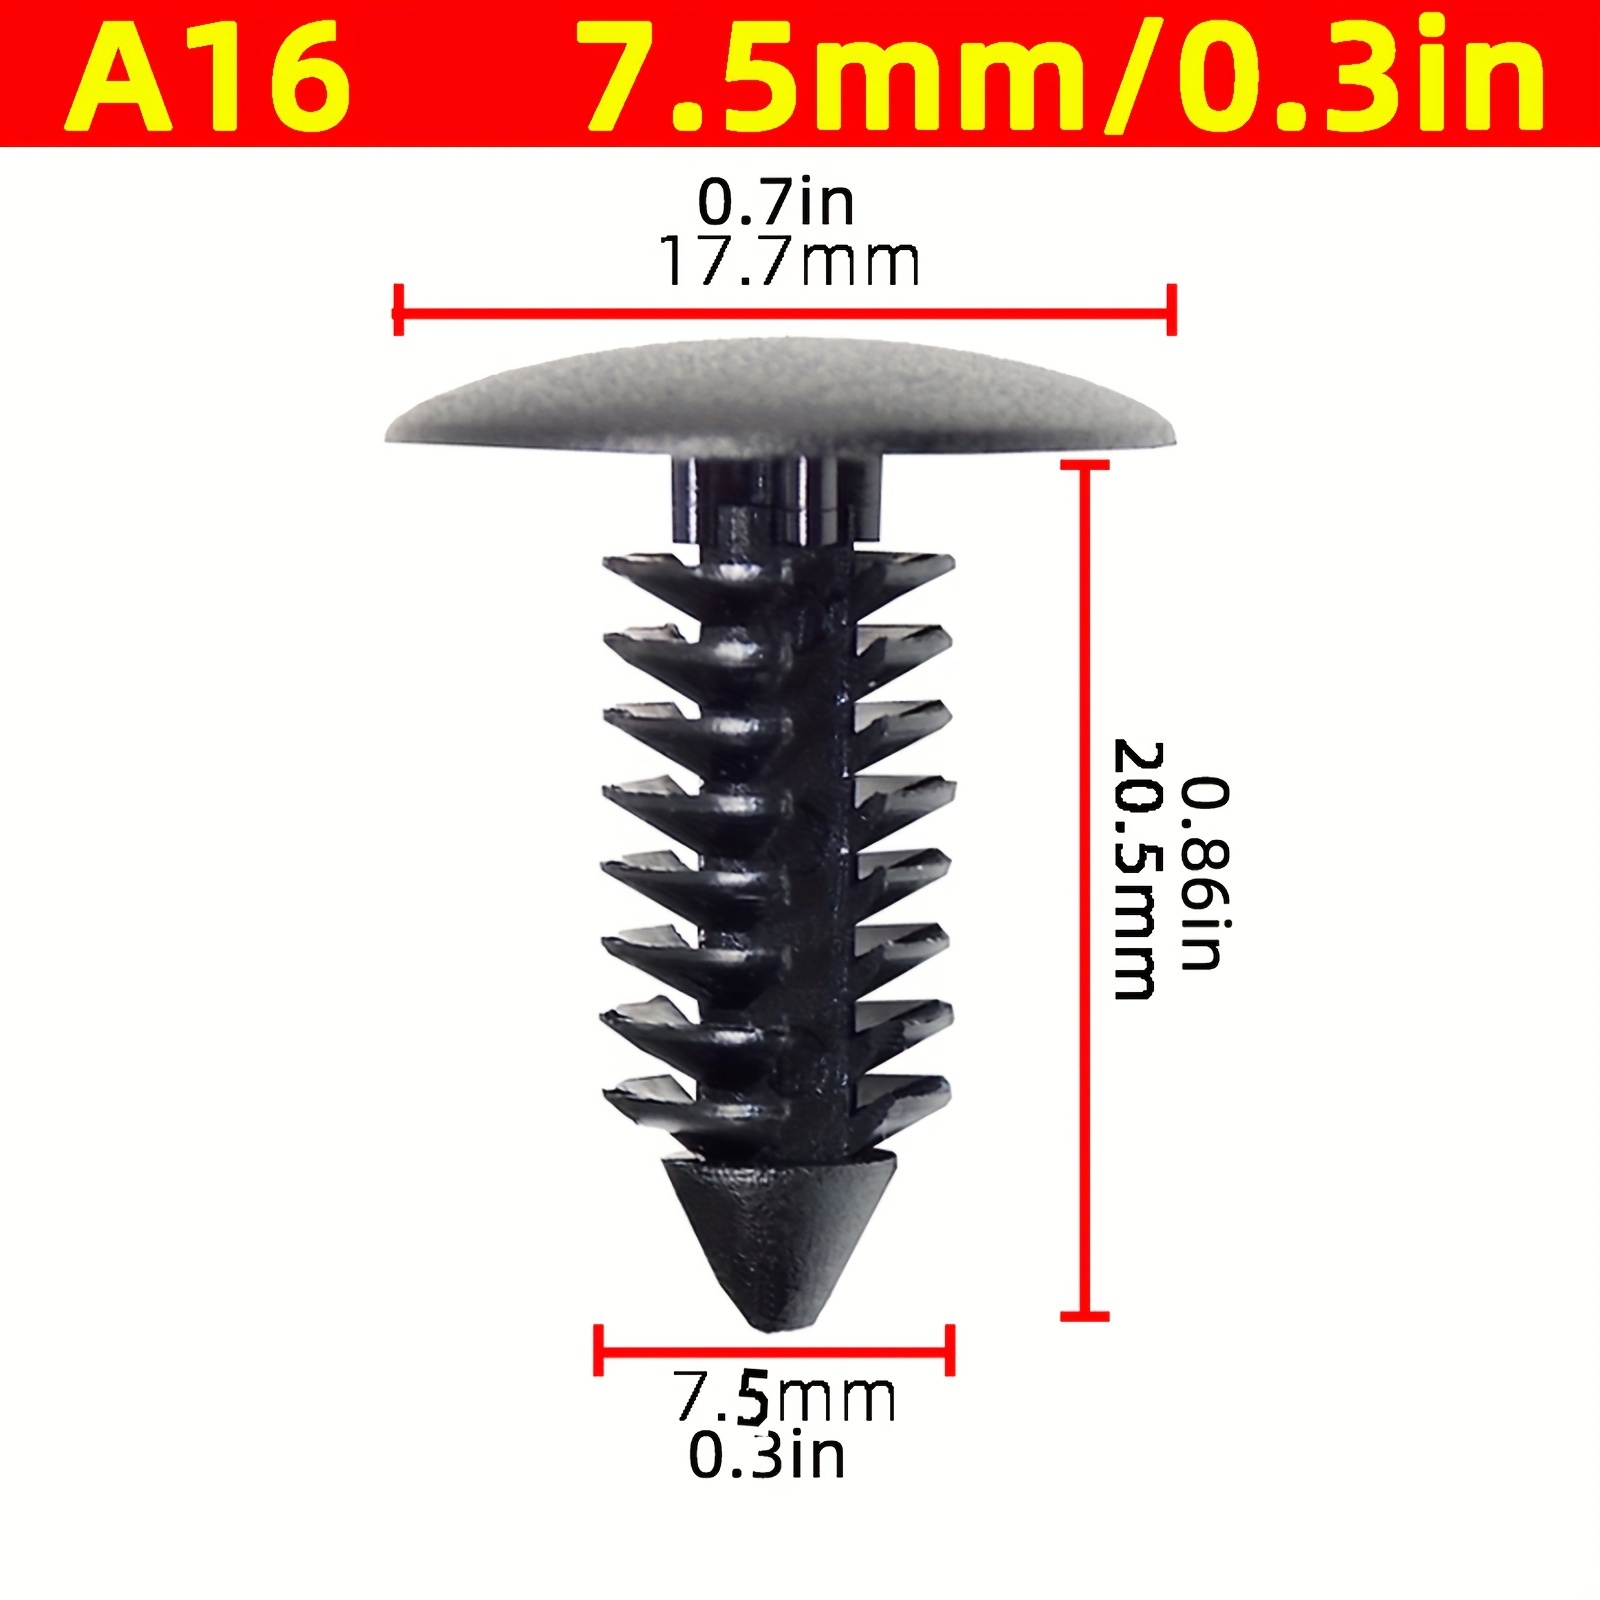 50pcs Auto Bumper Fasteners 7-8mm (0.28-0.31in) Hole, Car Clips Fender  Bumper Shield Retainer, Plastic Rivet For GM, For Ford, For Chrysler